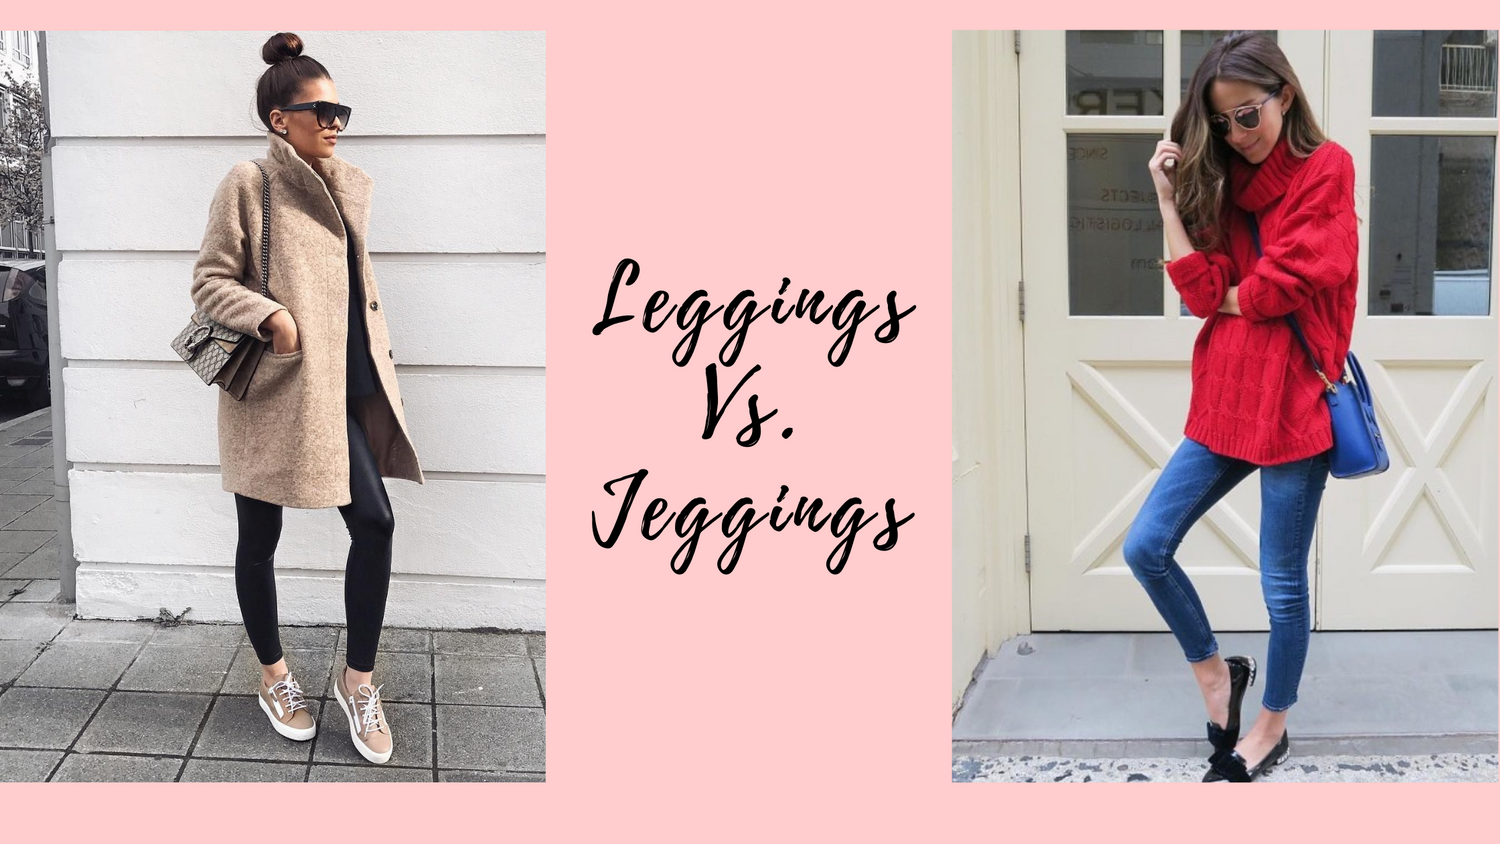 Jeggings and Leggings: What's Acceptable Now?